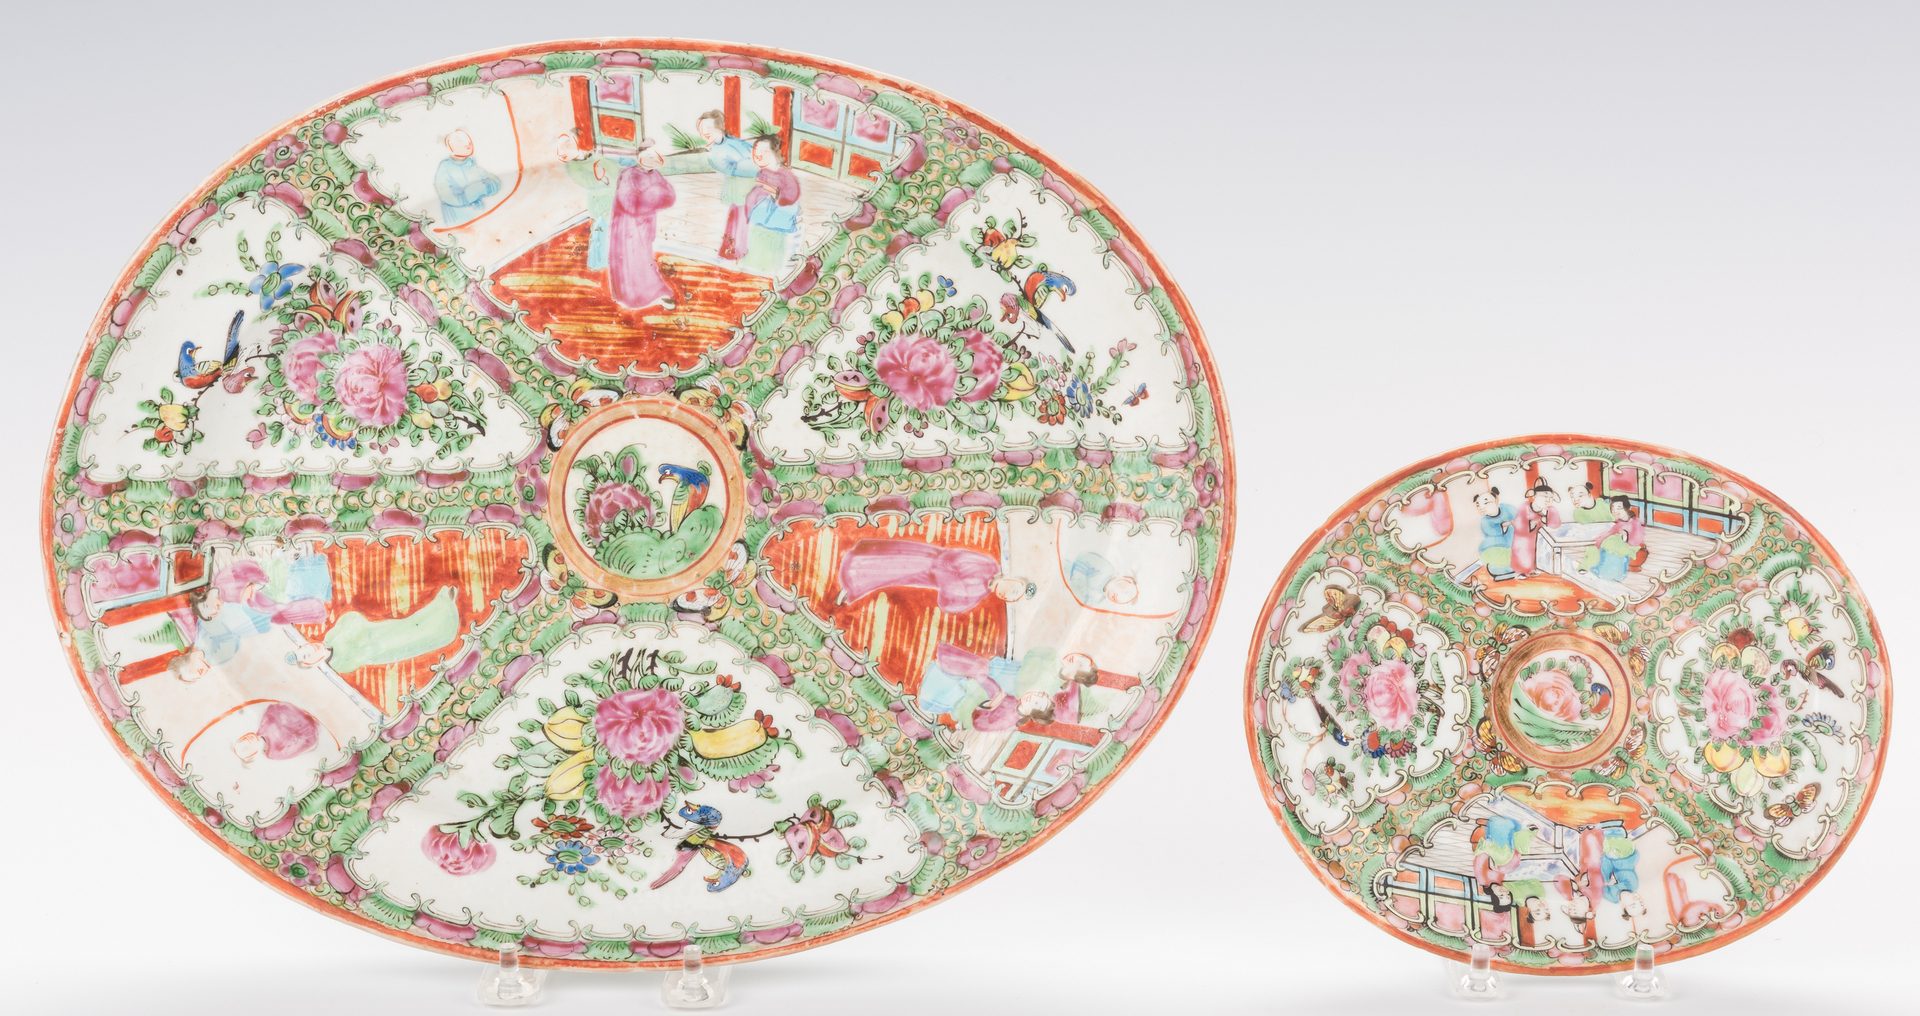 Lot 25: Rose Medallion Soup and Sauce Tureens with Underplates